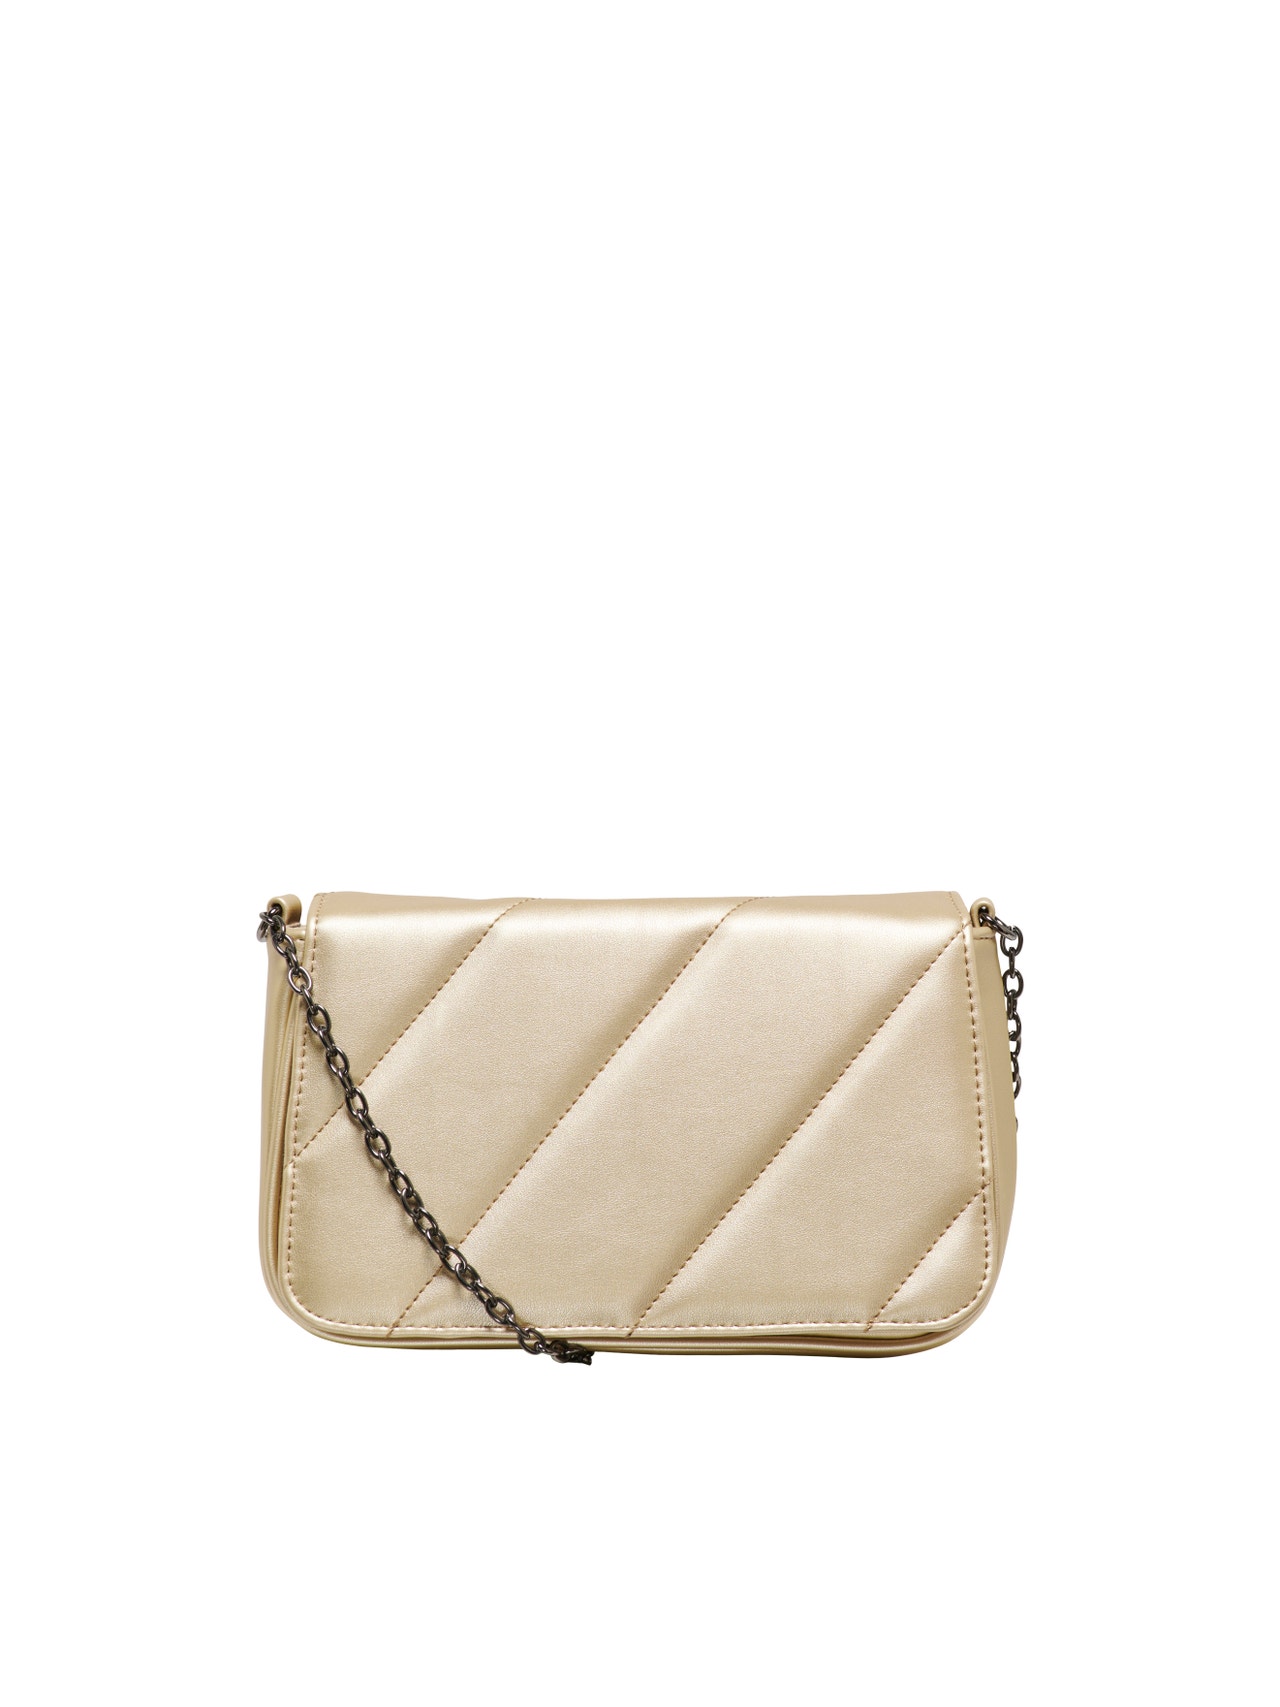 ONLY Chain strap Bag -Gold Colour - 15300843